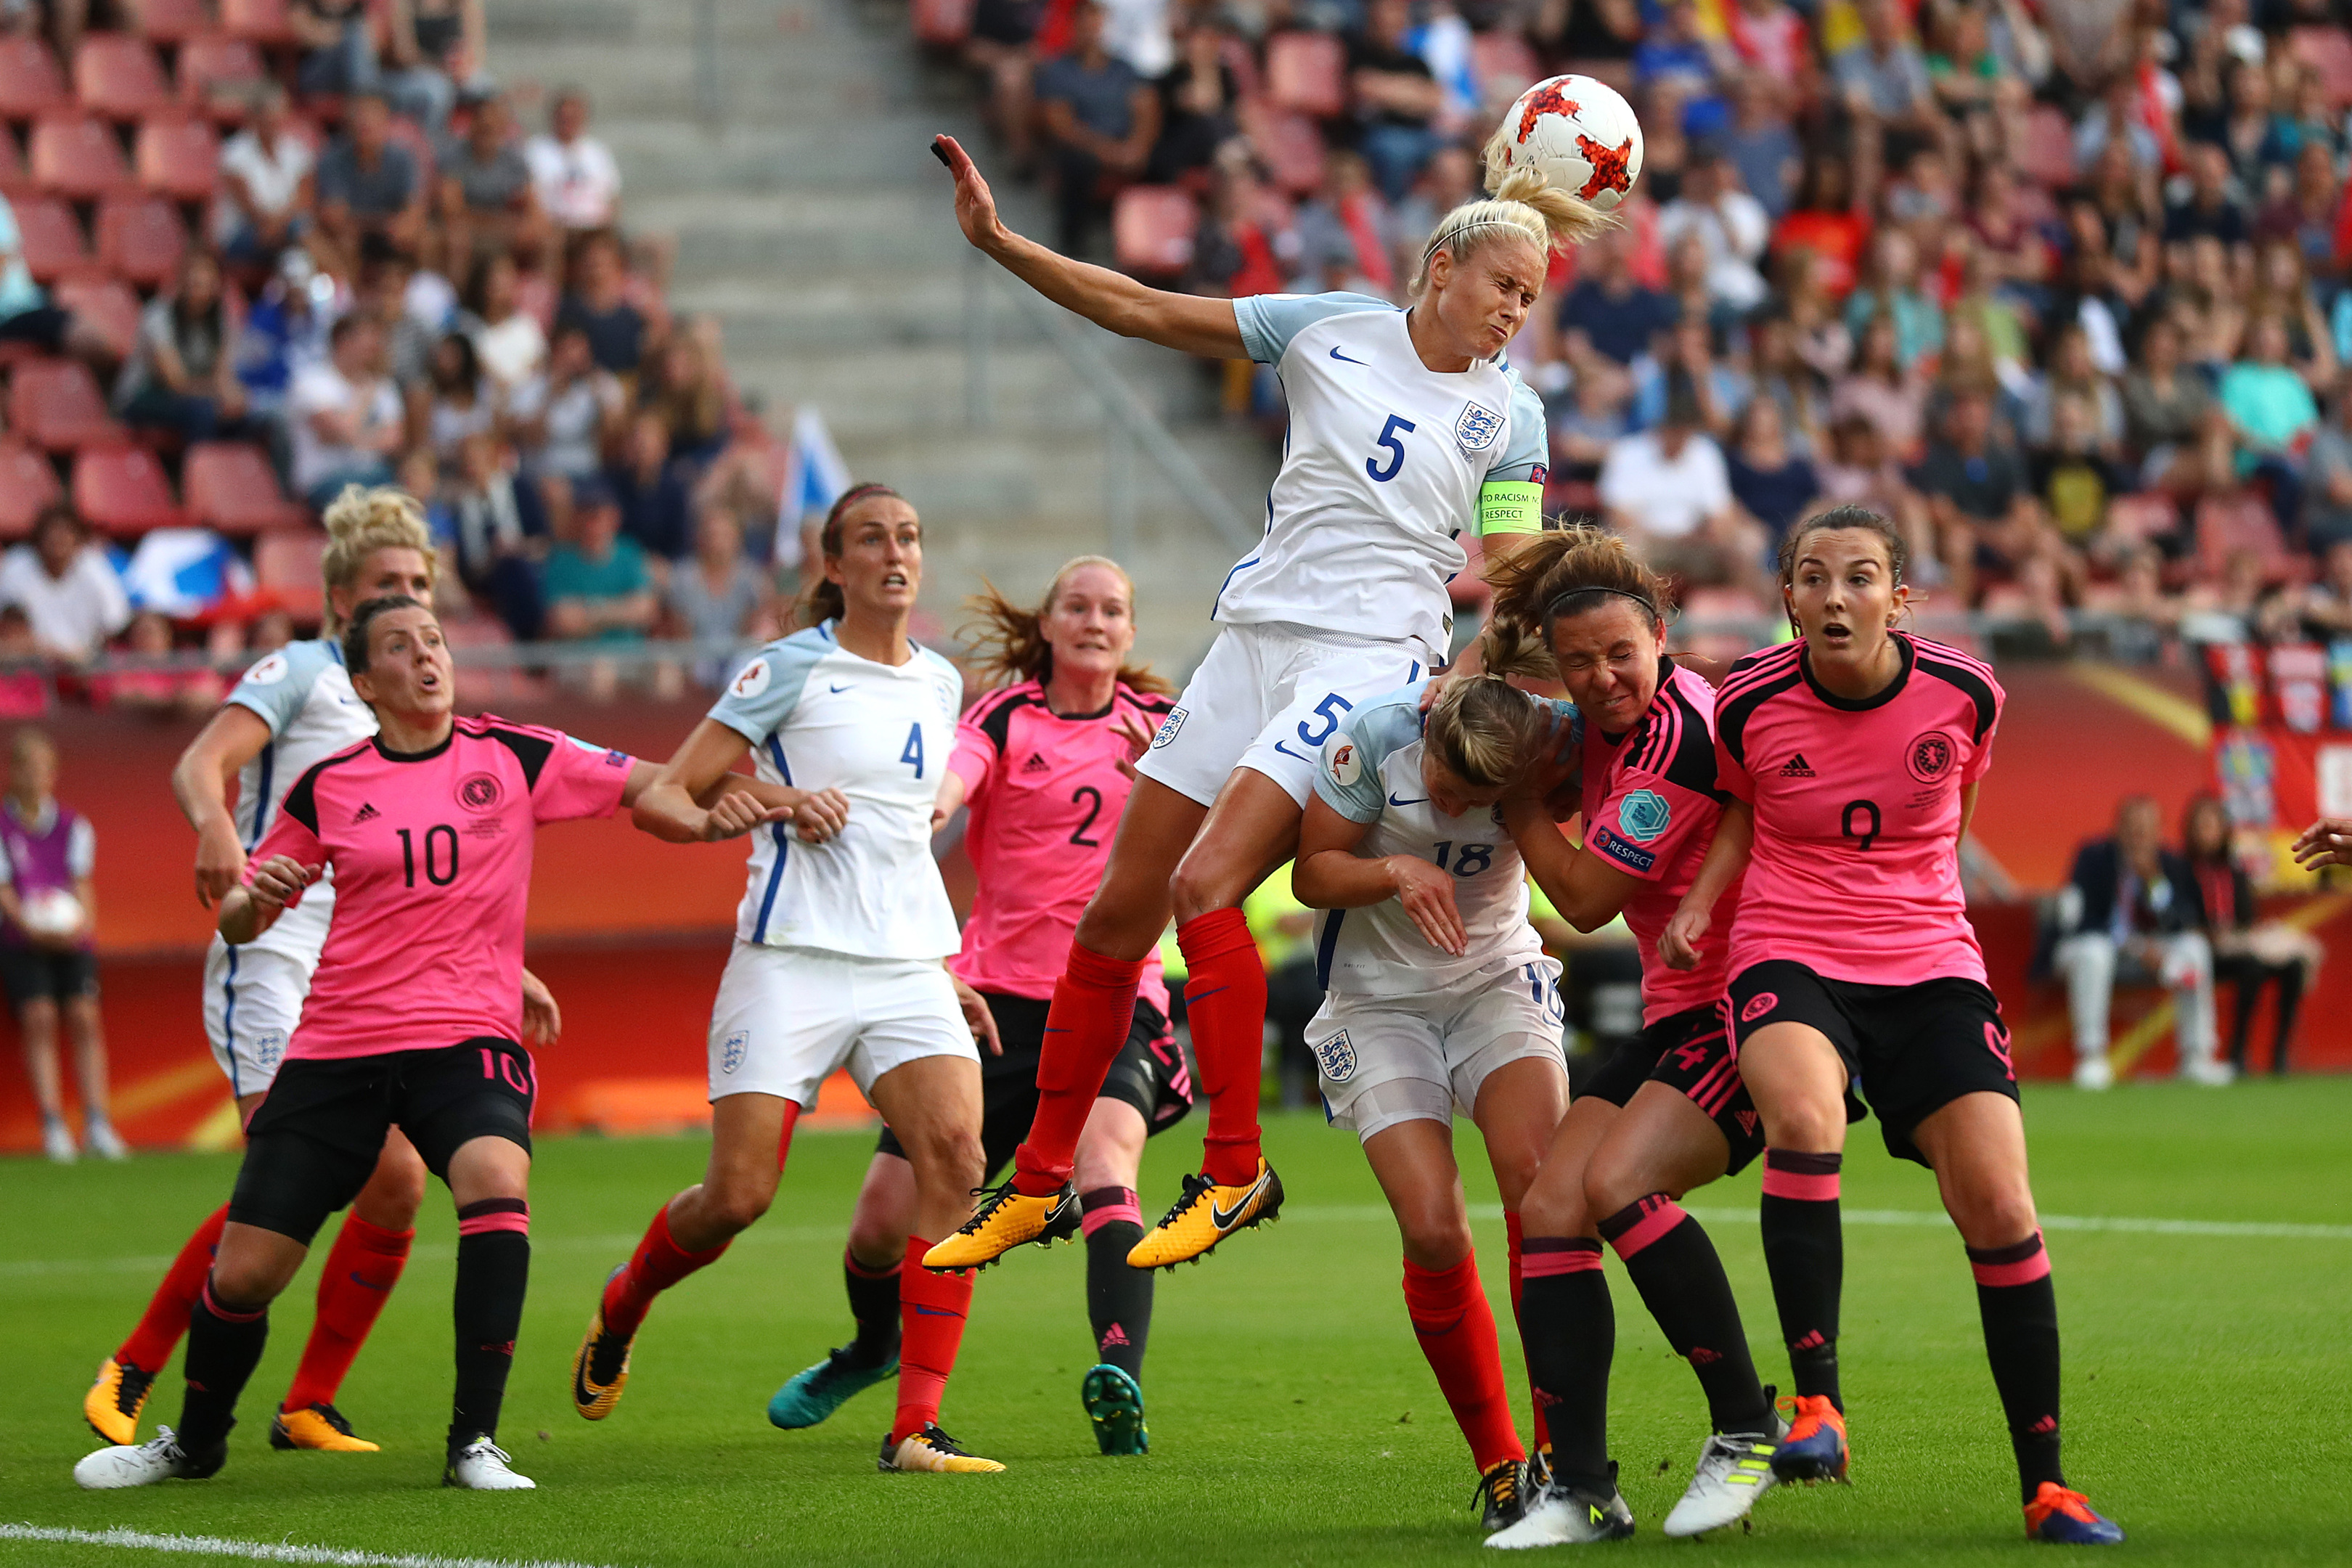 Steph Houghton of England clears the ball from danger during the UEFA Women's Euro 2017 Group D match between England and Scotland at Stadion Galgenwaard on July 19, 2017 in Utrecht.